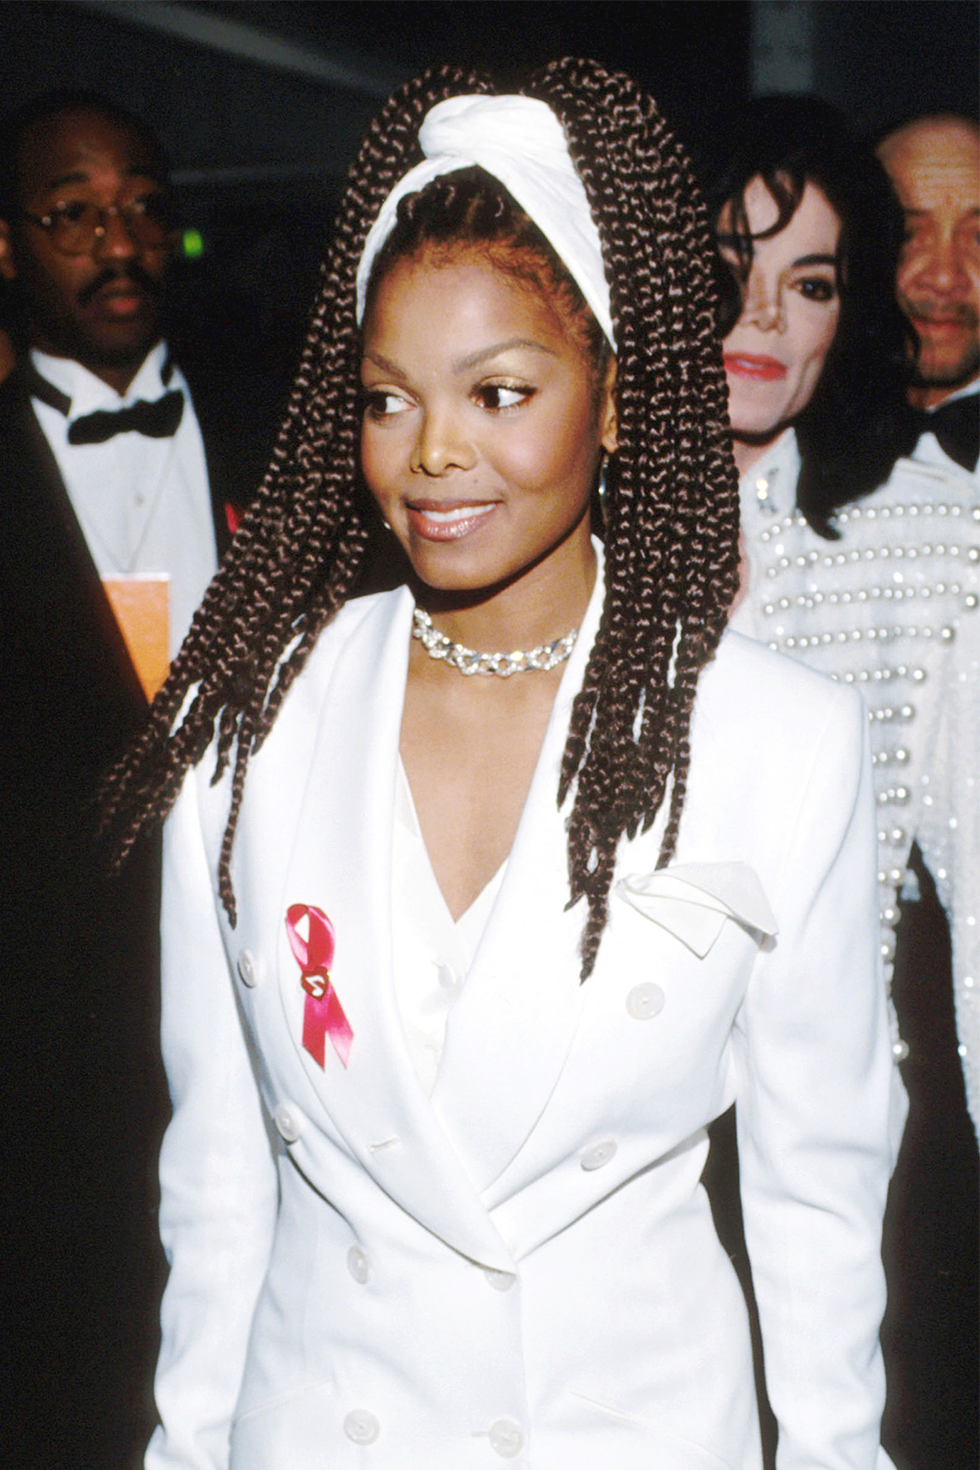 20 Popular 90s Hairstyles That Made an Epic Comeback